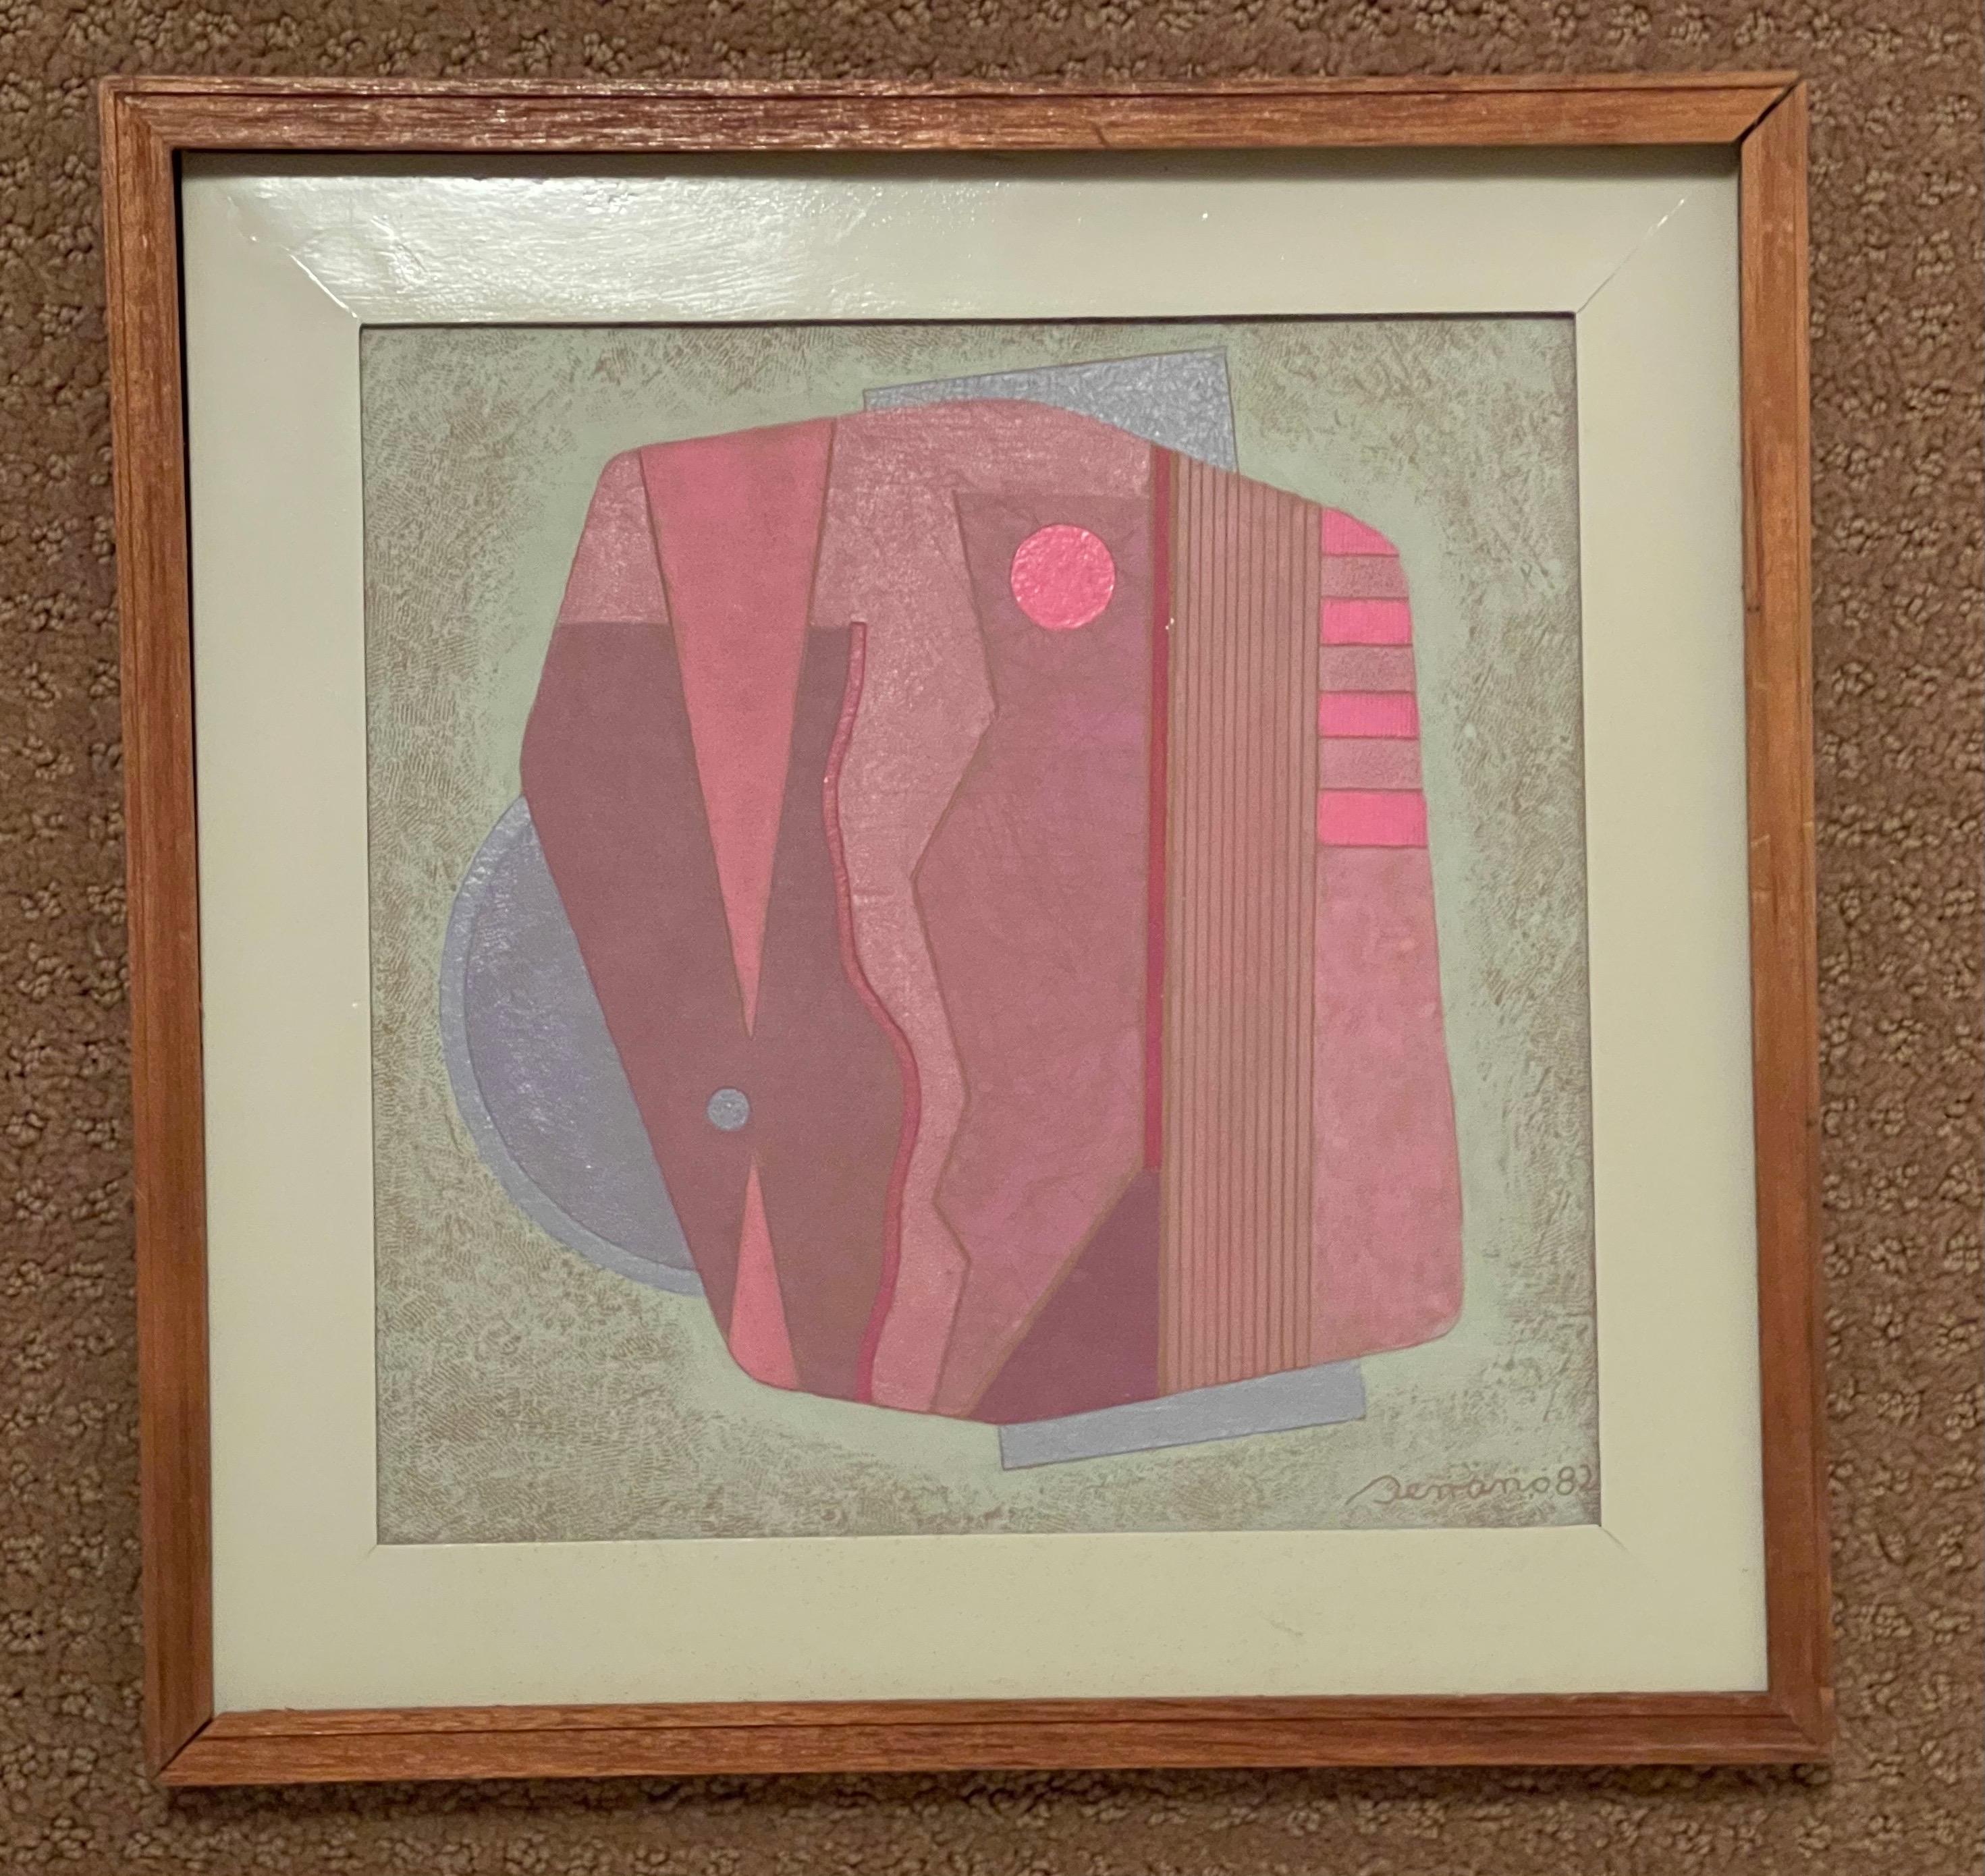 Limited Edition Post Modern mixed media three dimensional abstract by listed Mexican artist Jose Luis Serrano, circa 1980s. Framed and mounted on board measuring 13